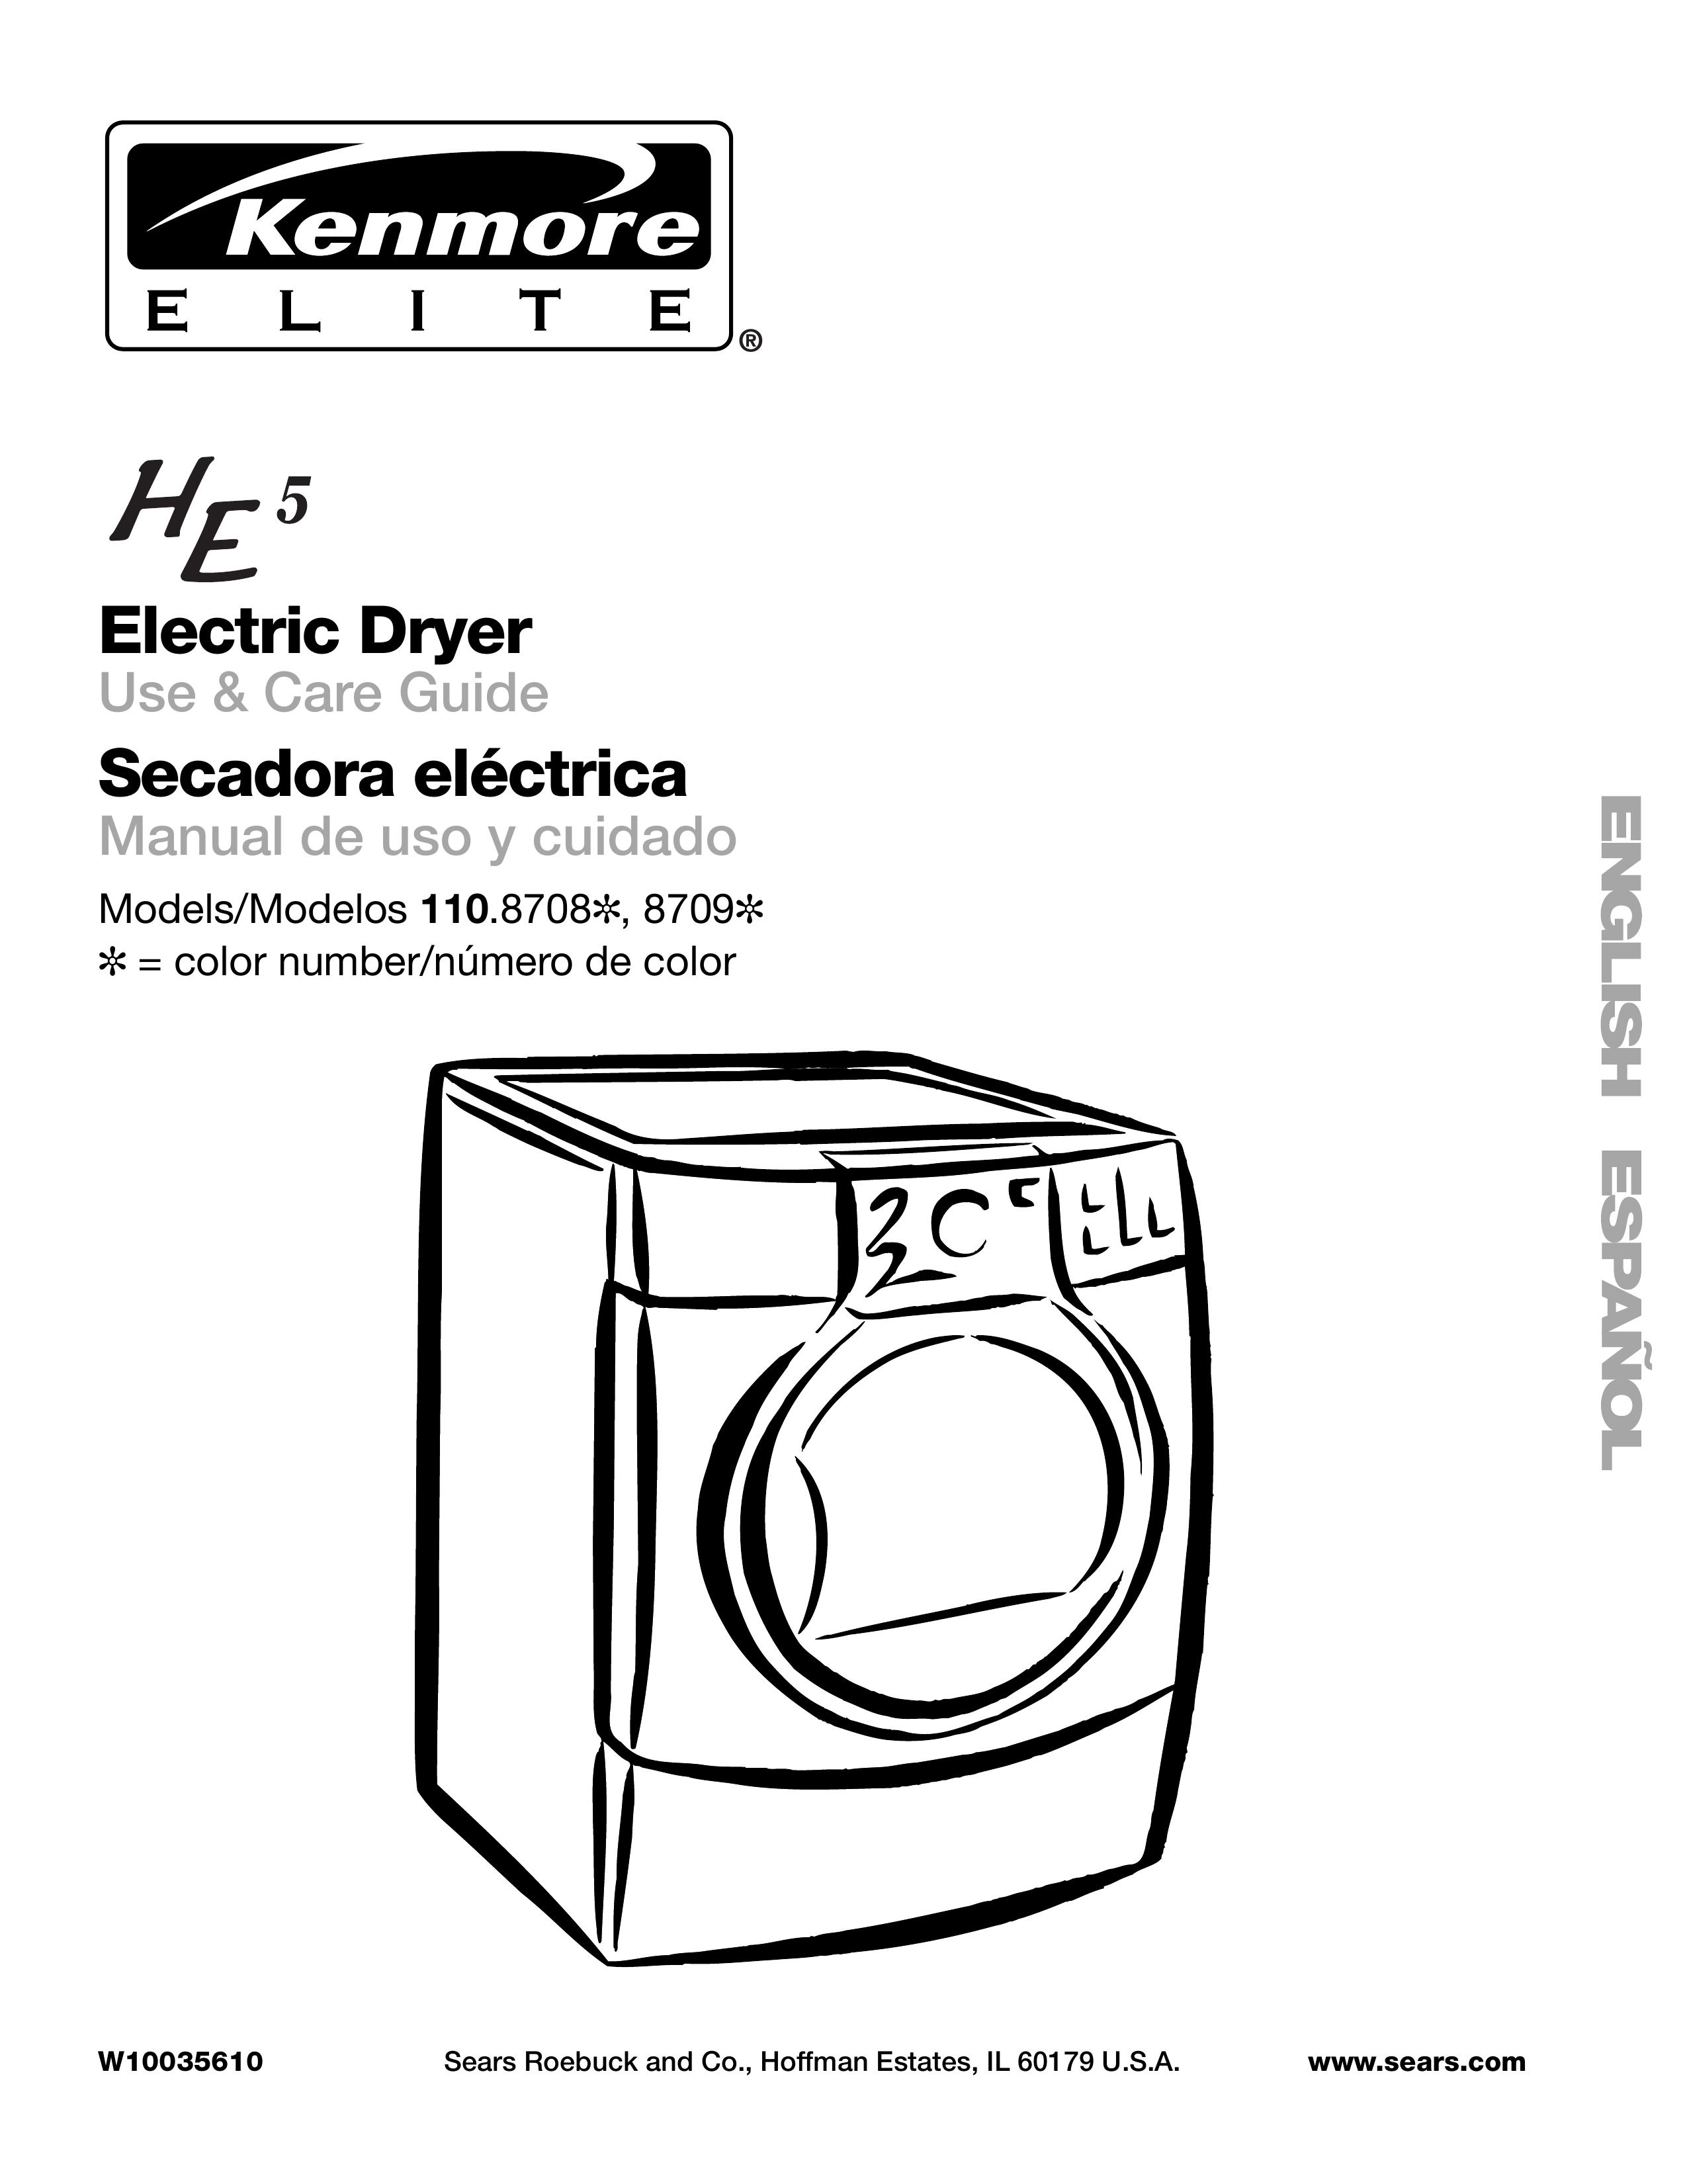 Kenmore 110.8709 Clothes Dryer User Manual